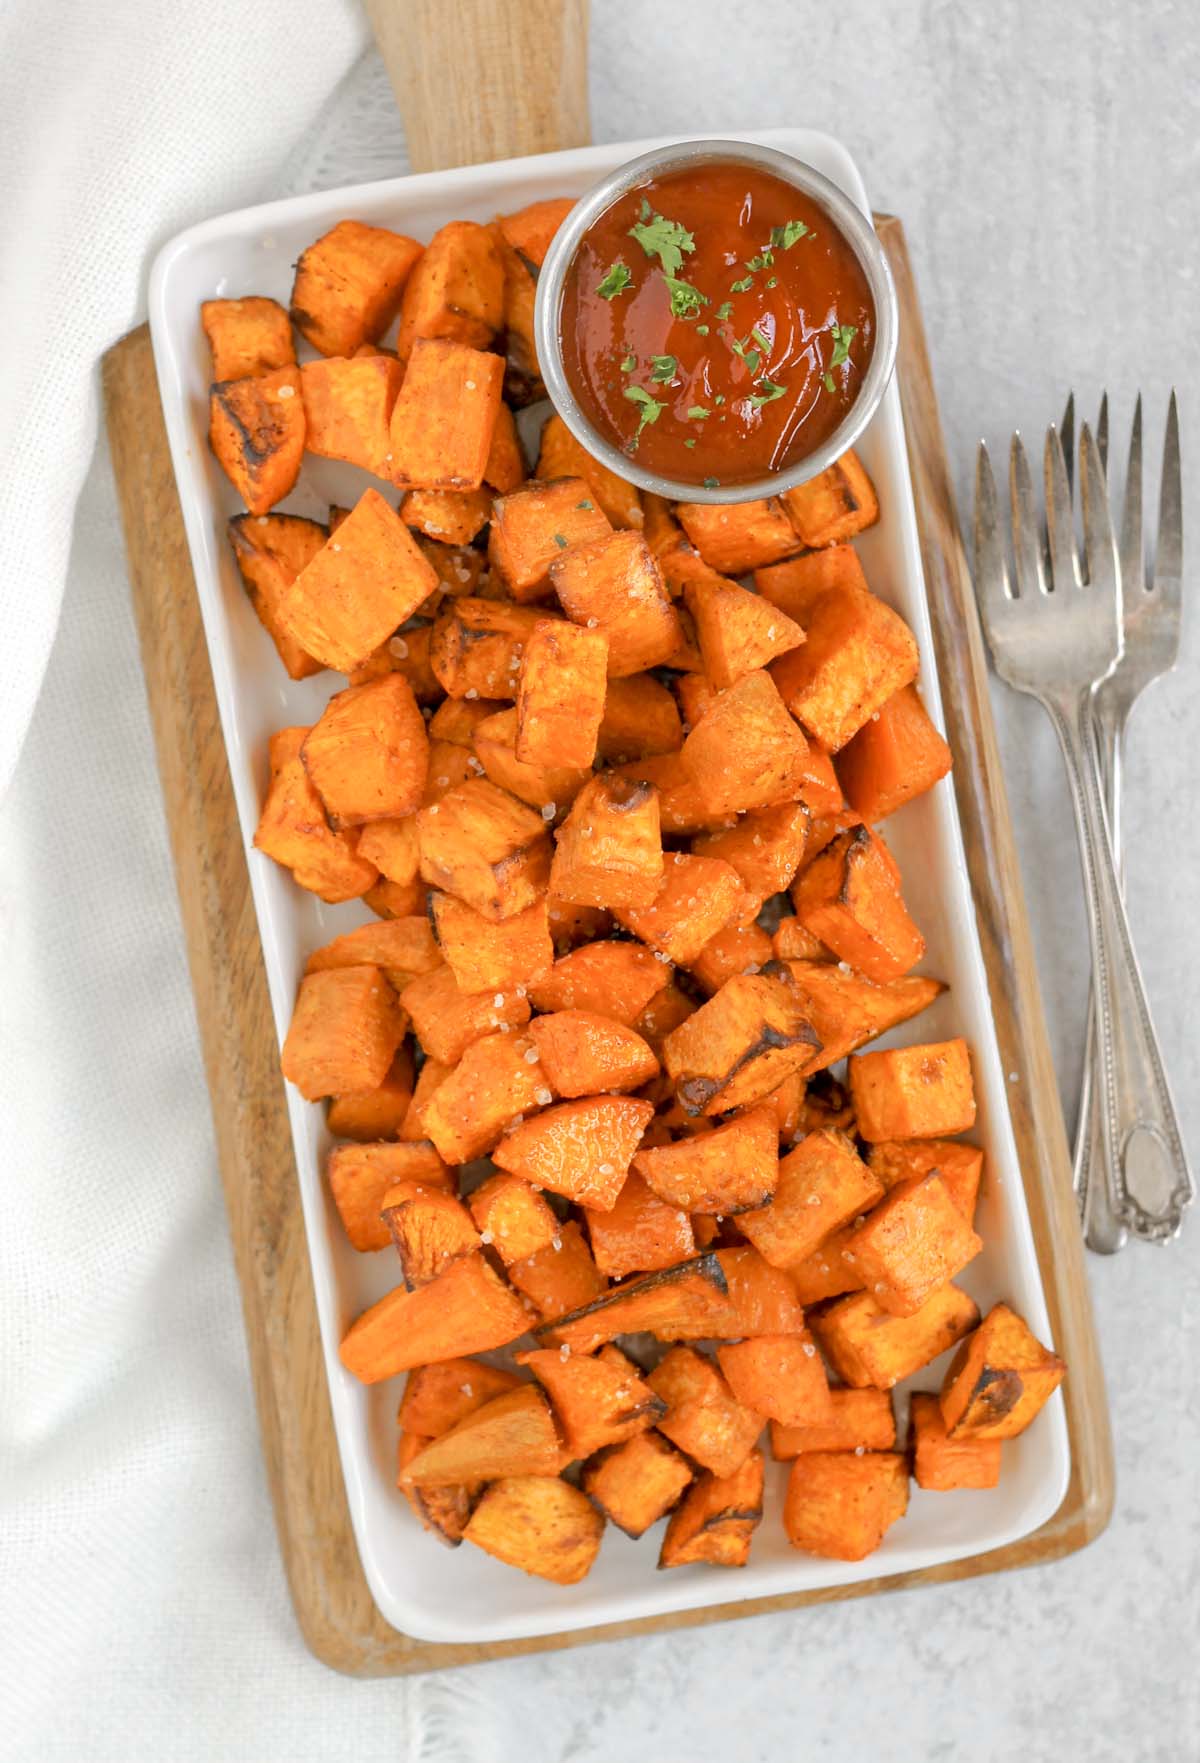 Roasted sweet potato cubes on a white rectangular plate with a side of ketchup.